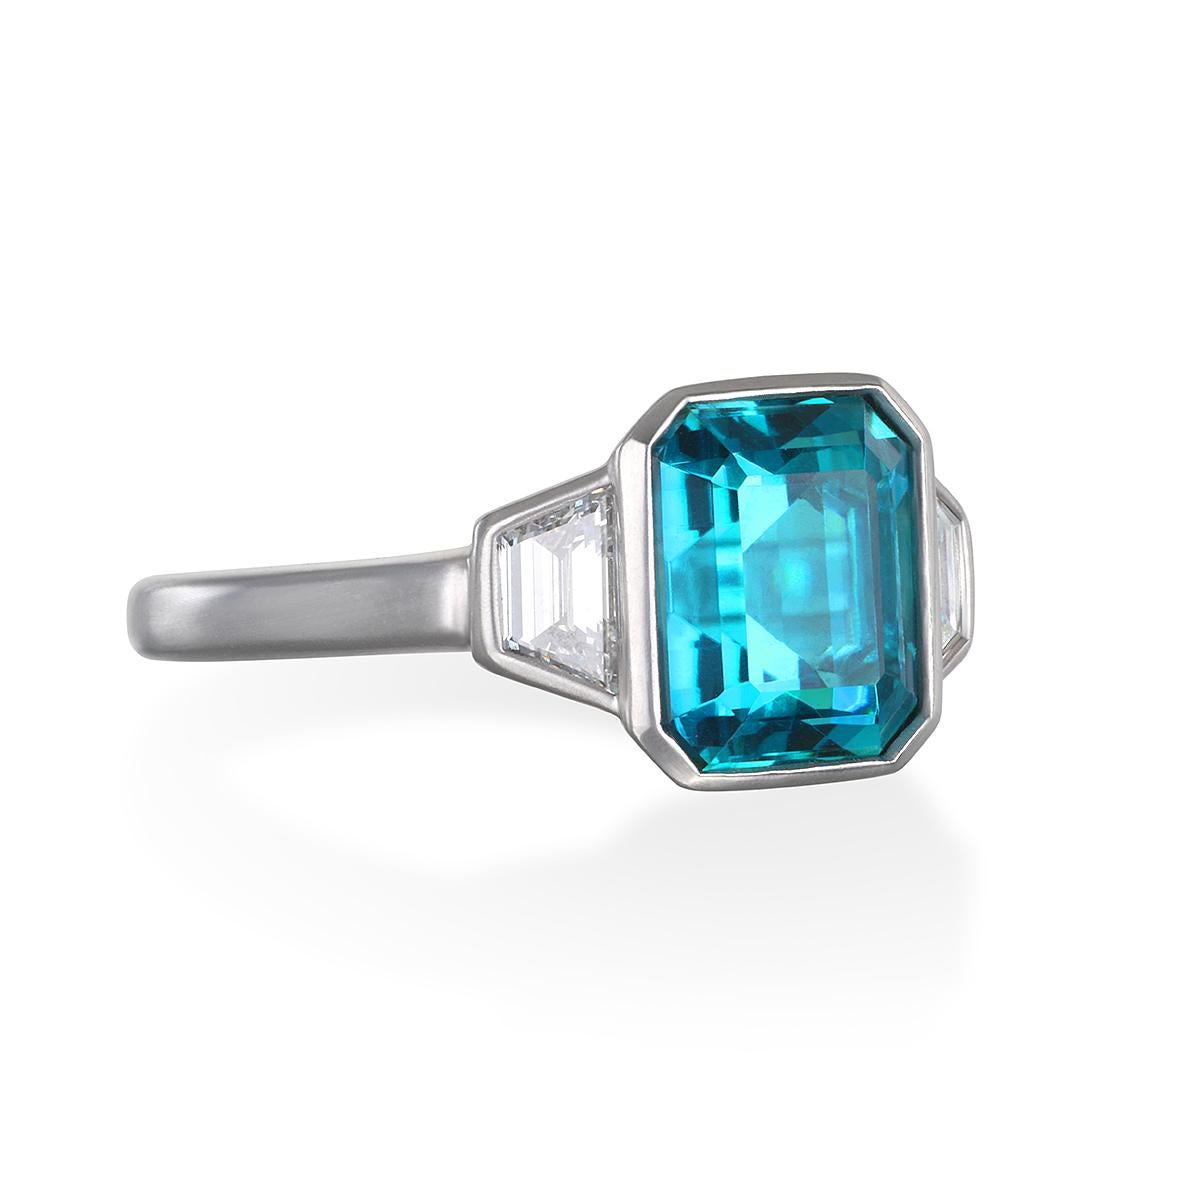 A rich shade of blue-green, Faye Kim has set this spectacular Emerald Cut Indicolite Tourmaline in platinum and flanked it with two diamond baguettes, all in an open bezel setting. Modern yet with an Art Deco/vintage feel and matte finished, this